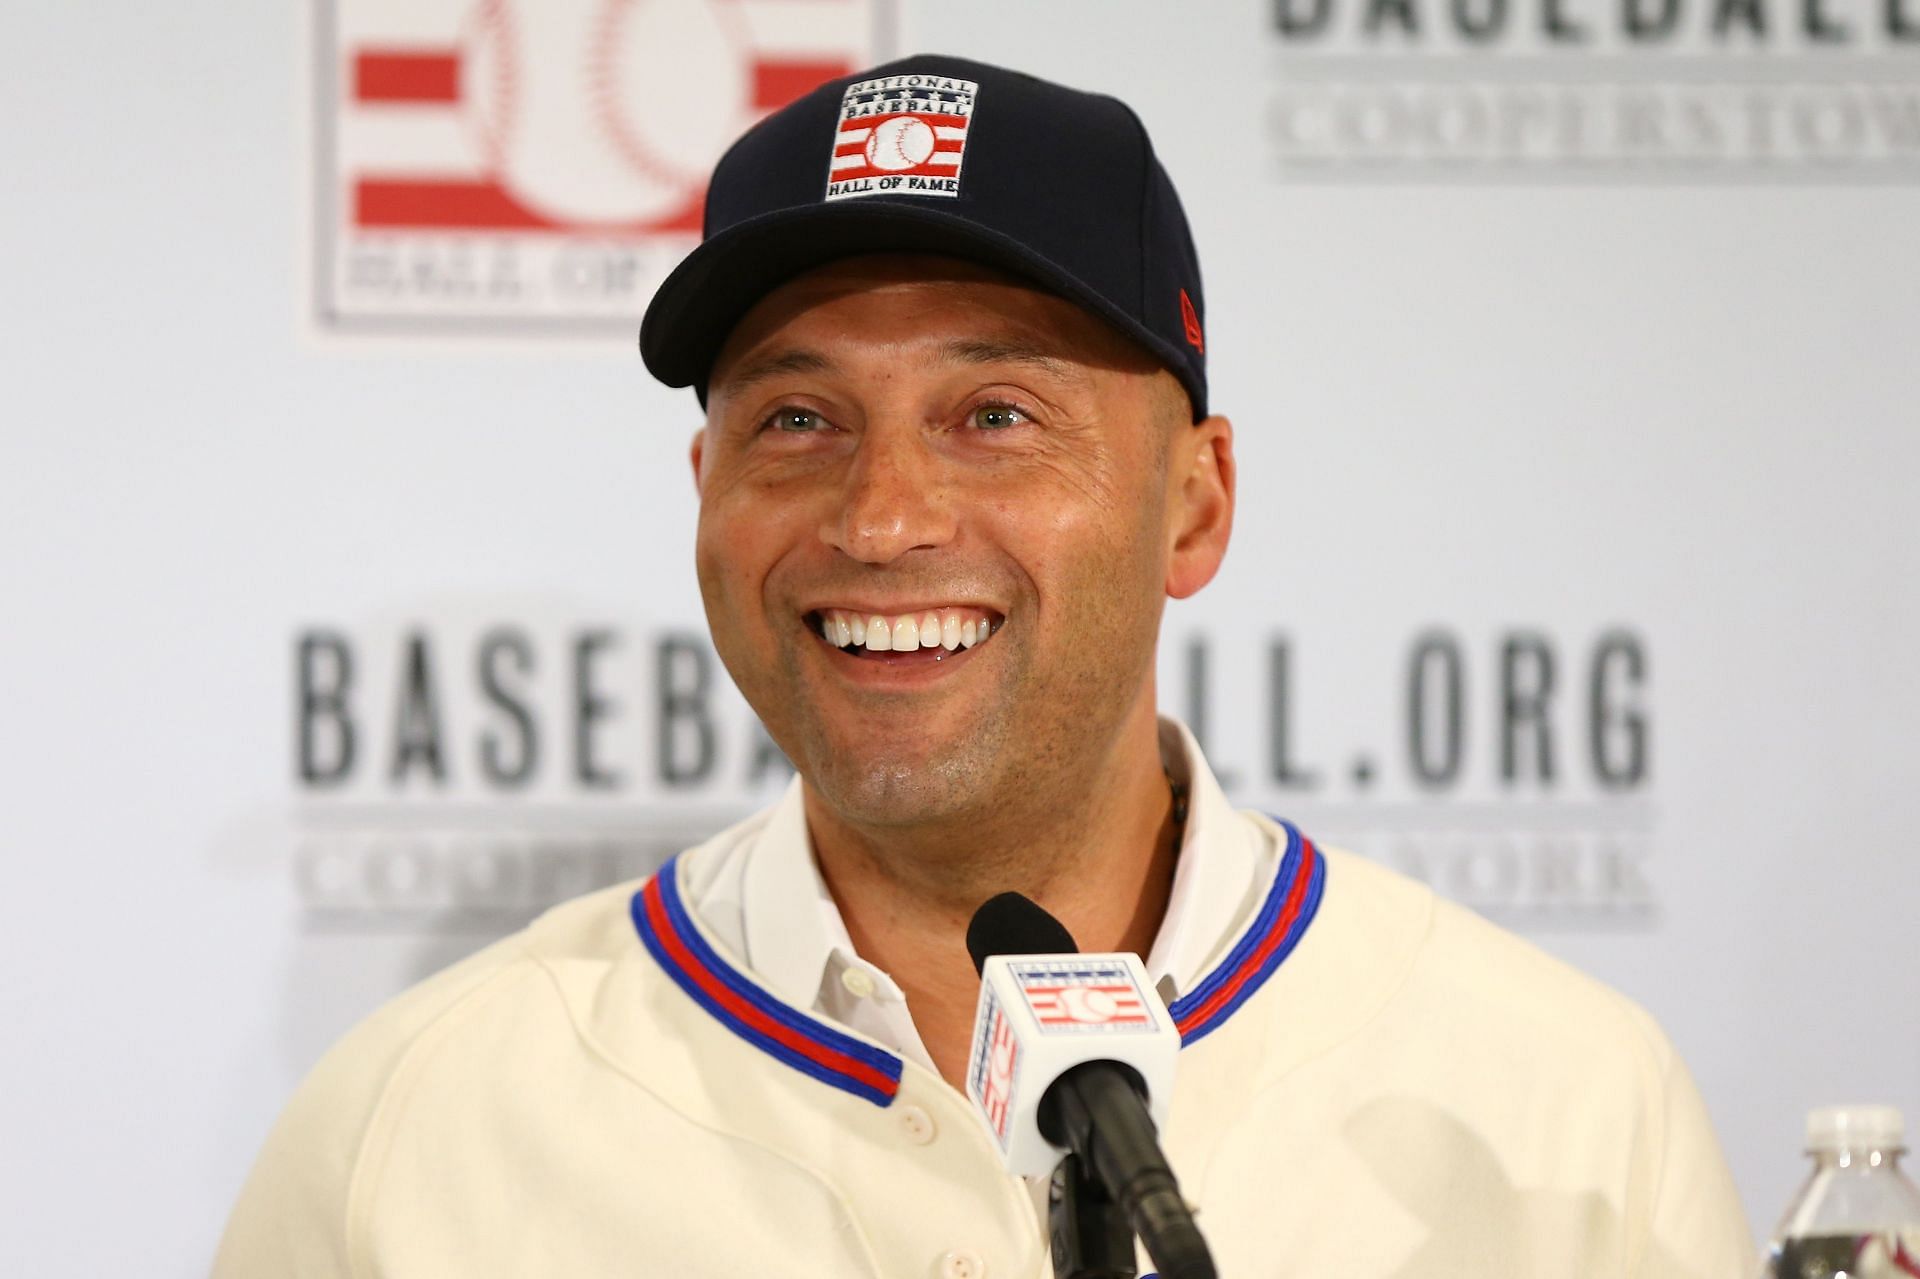 Derek Jeter speaks to the media after being elected into the National Baseball Hall of Fame Class of 2020 on January 22, 2020 at the St. Regis Hotel in New York City. The National Baseball Hall of Fame induction ceremony will be held on Sunday, July 26, 2020 in Cooperstown, NY. (Photo by Mike Stobe/Getty Images)